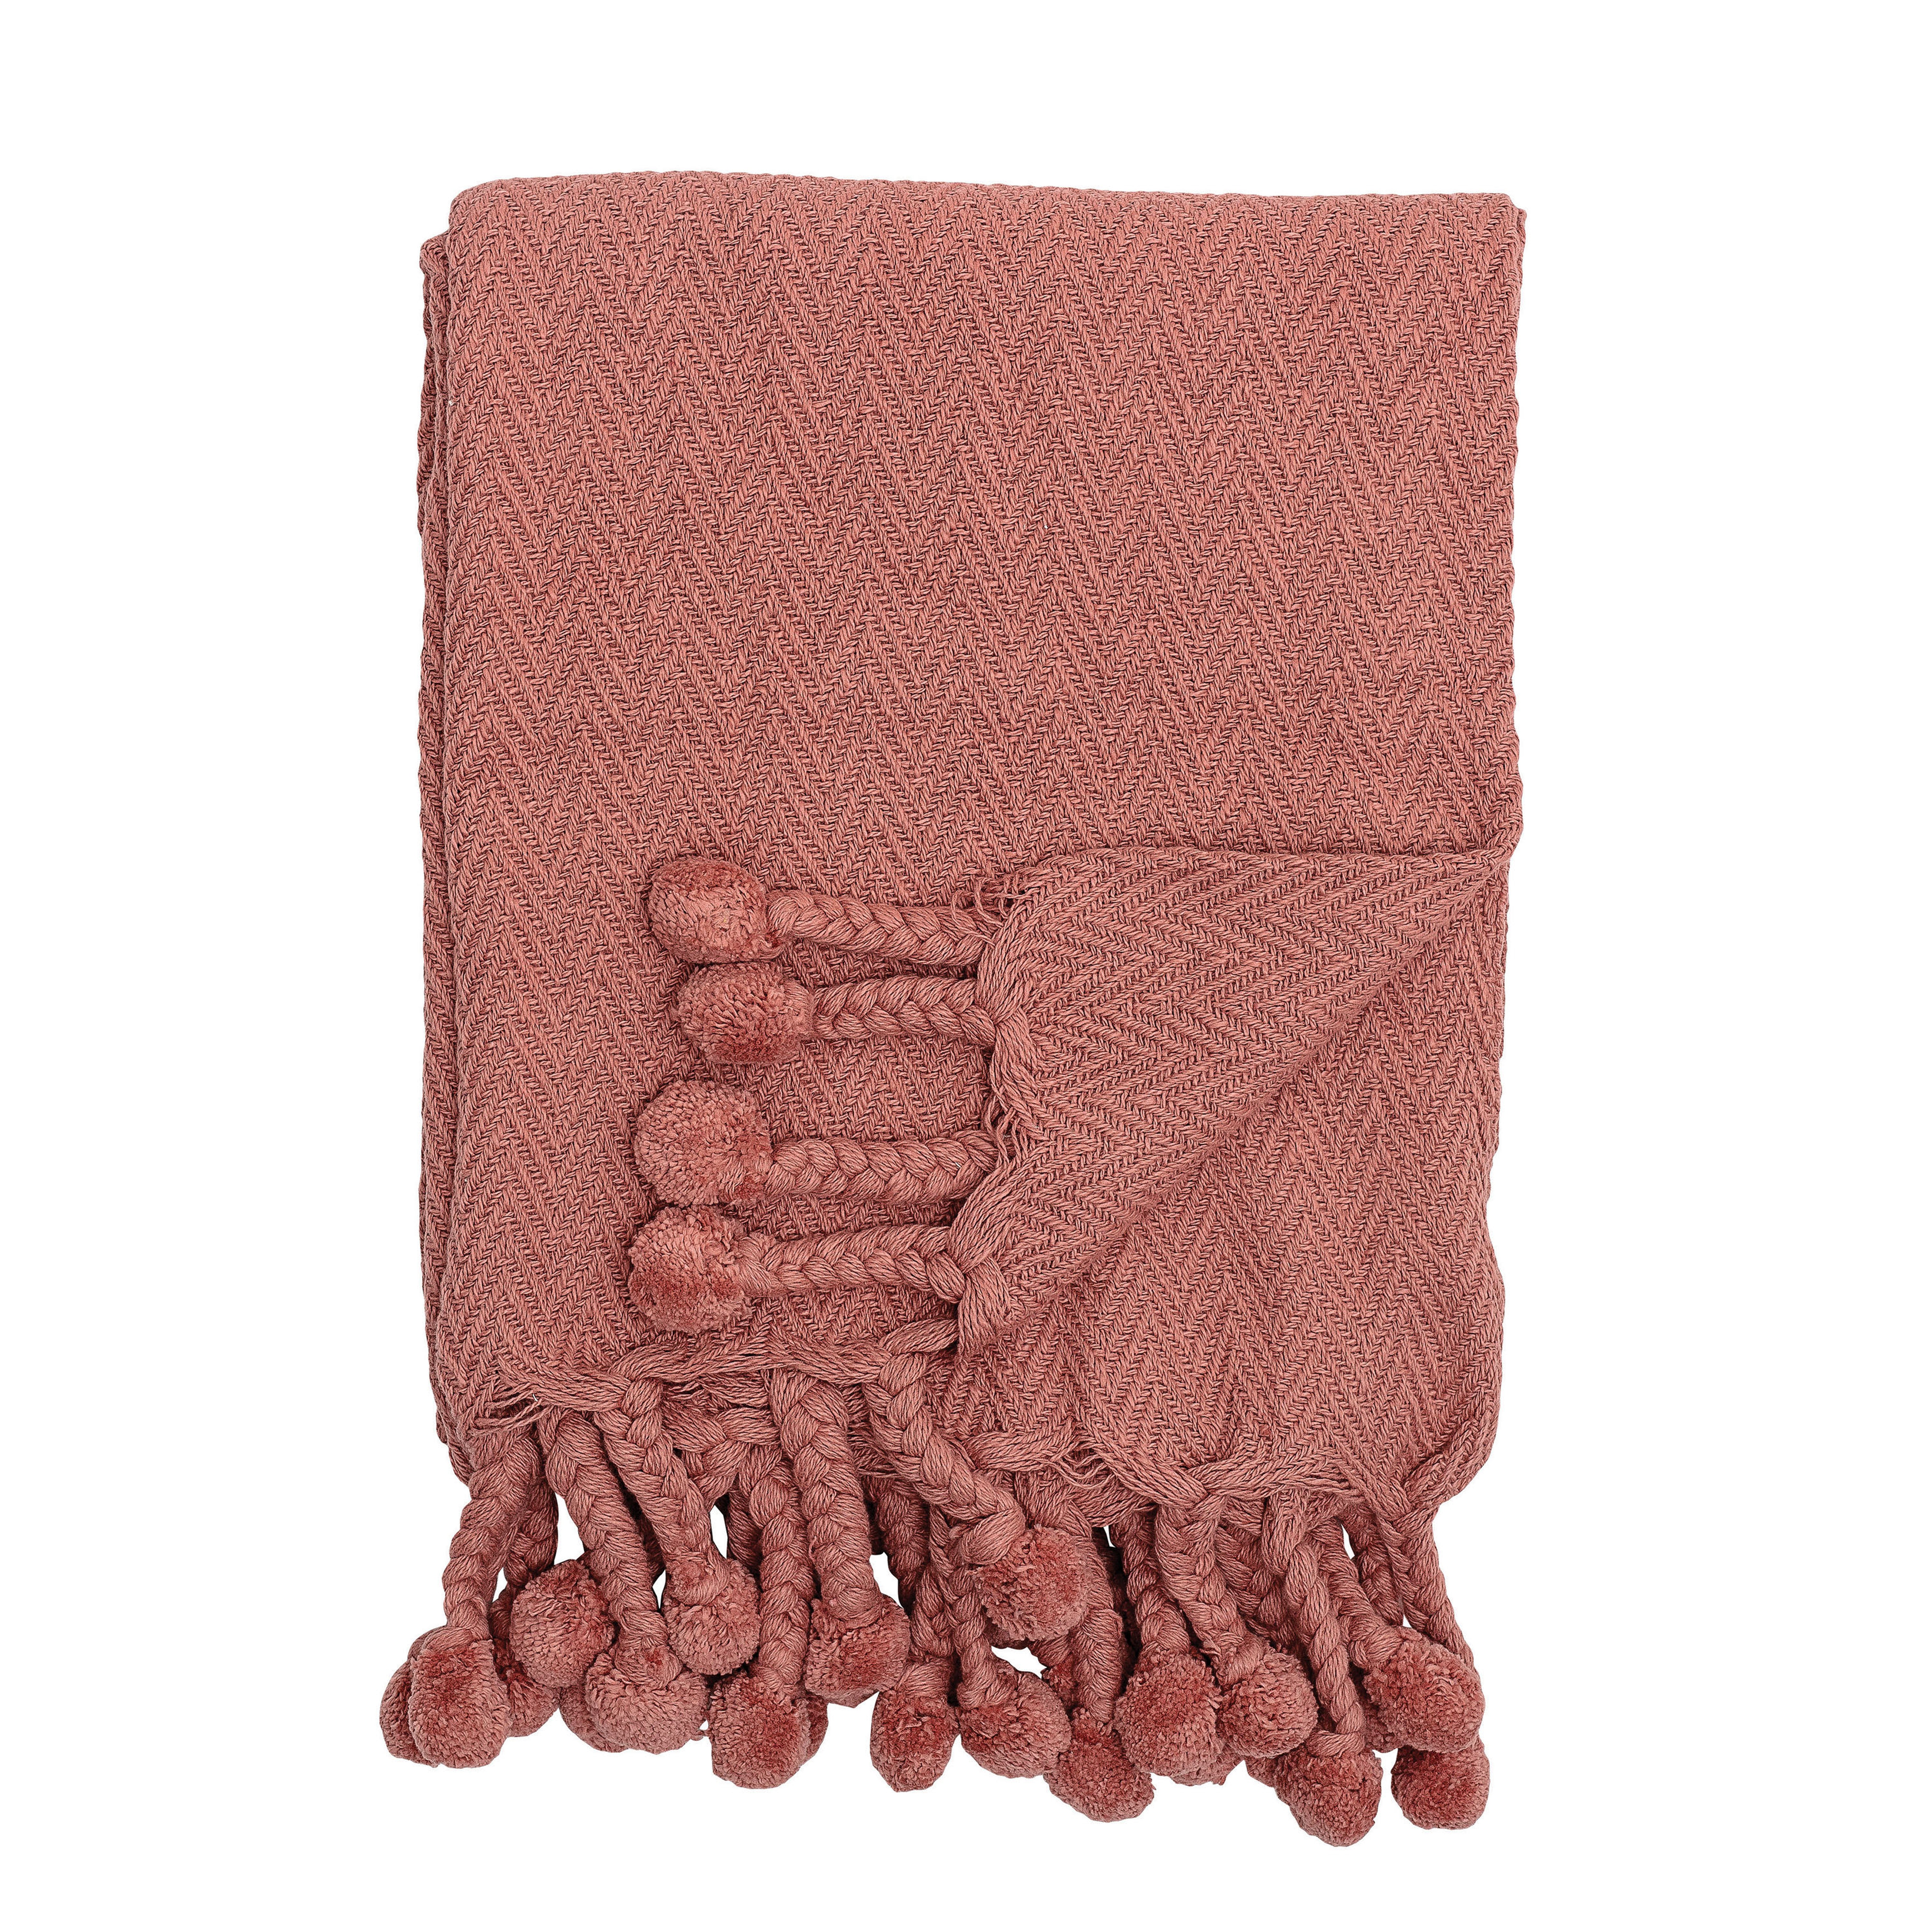 Cotton Throw with Braids & Pom Poms, Deep Rose - Bloomingville